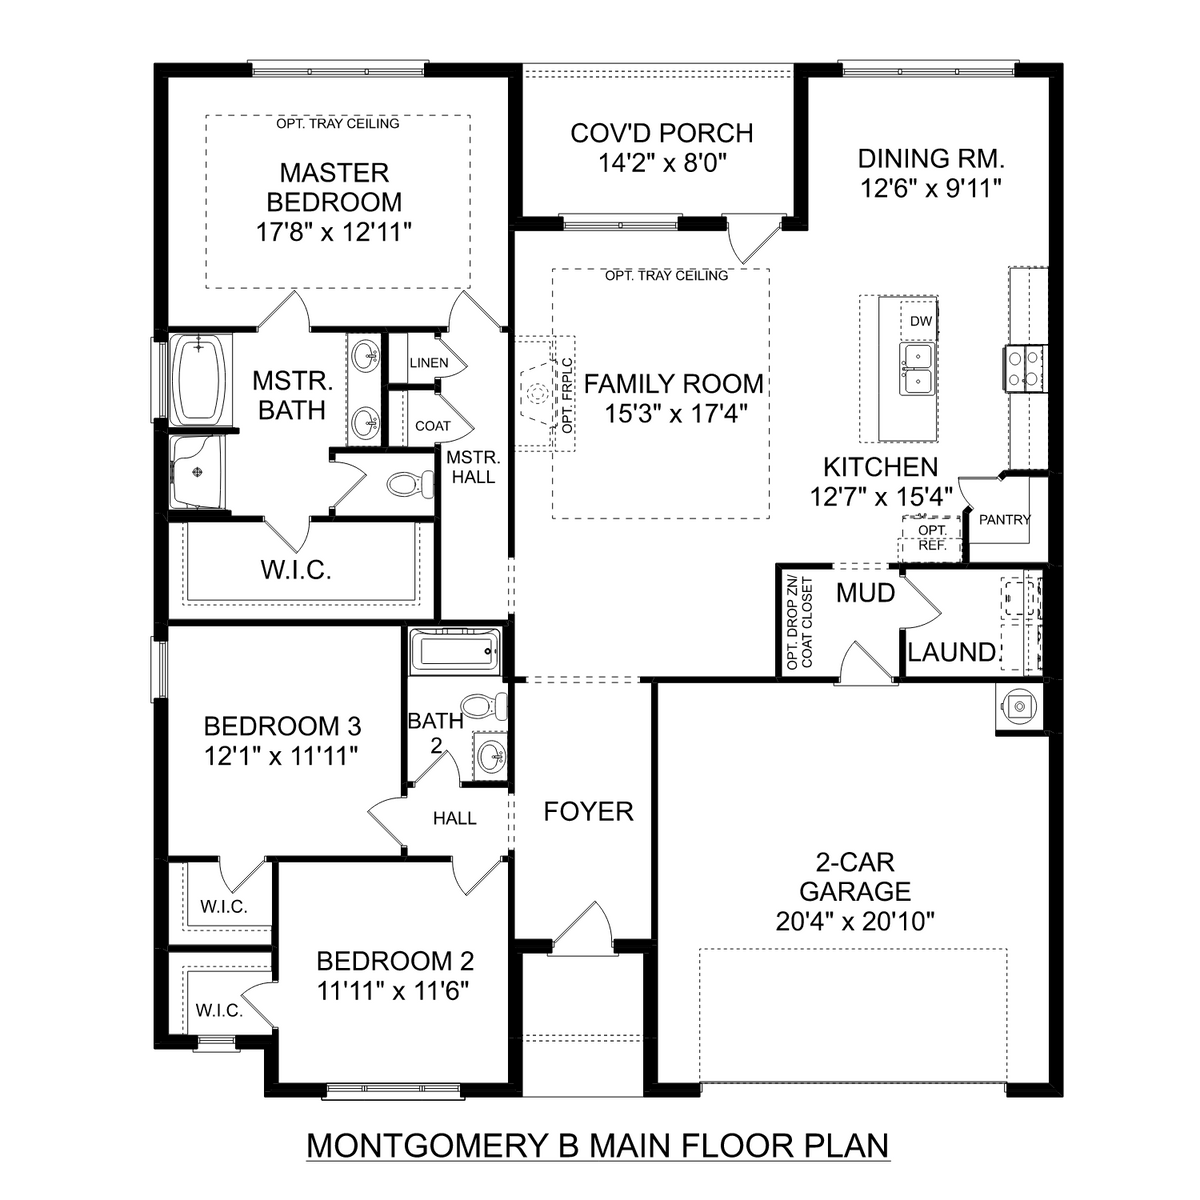 1 - The Montgomery B floor plan layout for 702 Ronnie Drive in Davidson Homes' Cain Park community.